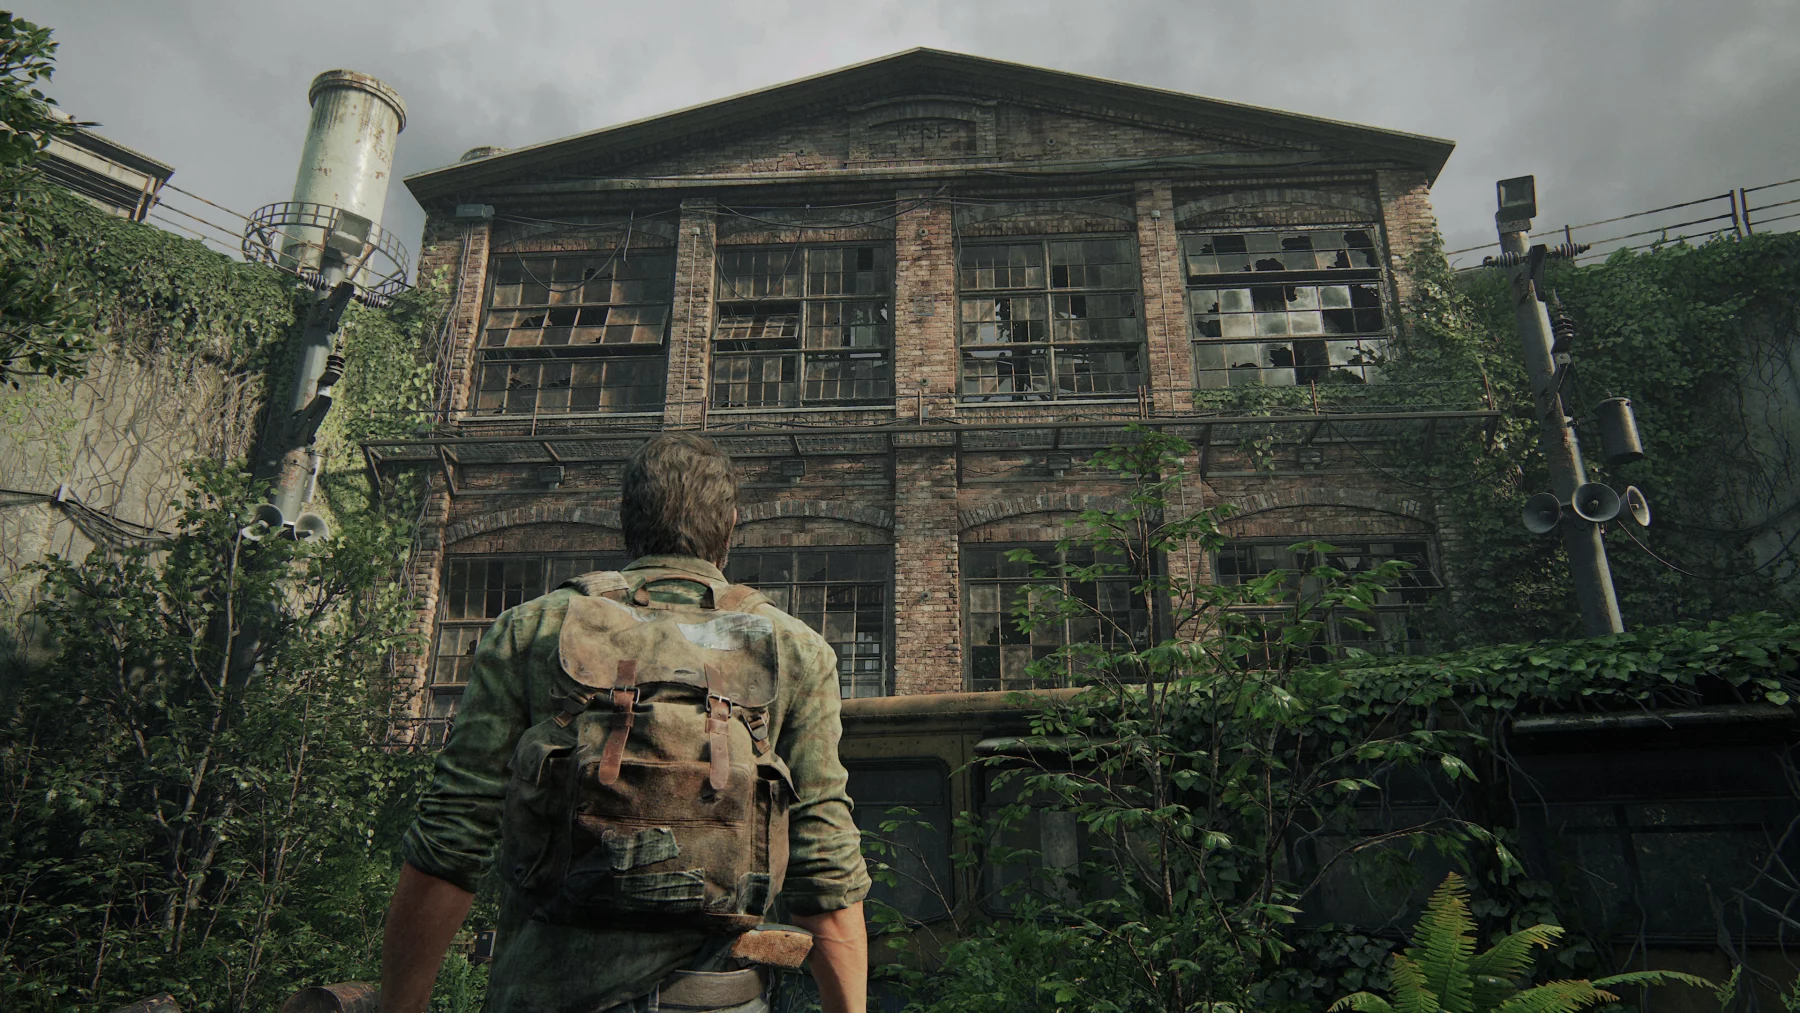 The Last of Us Part I (PS5) Review -